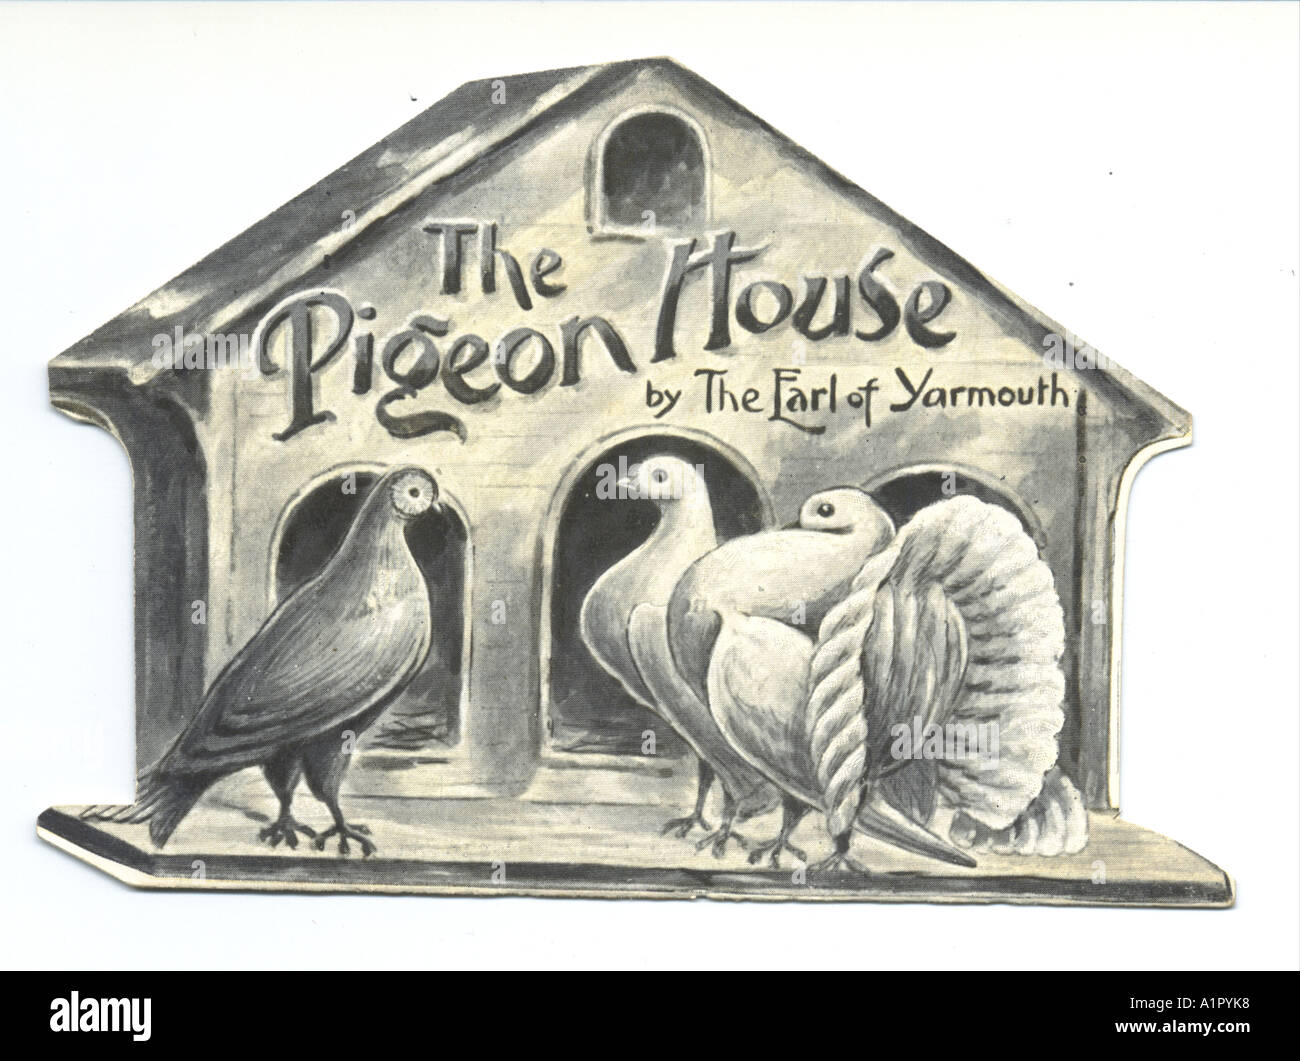 The Pigeon House, die cut theatre advertisement 1910 Stock Photo